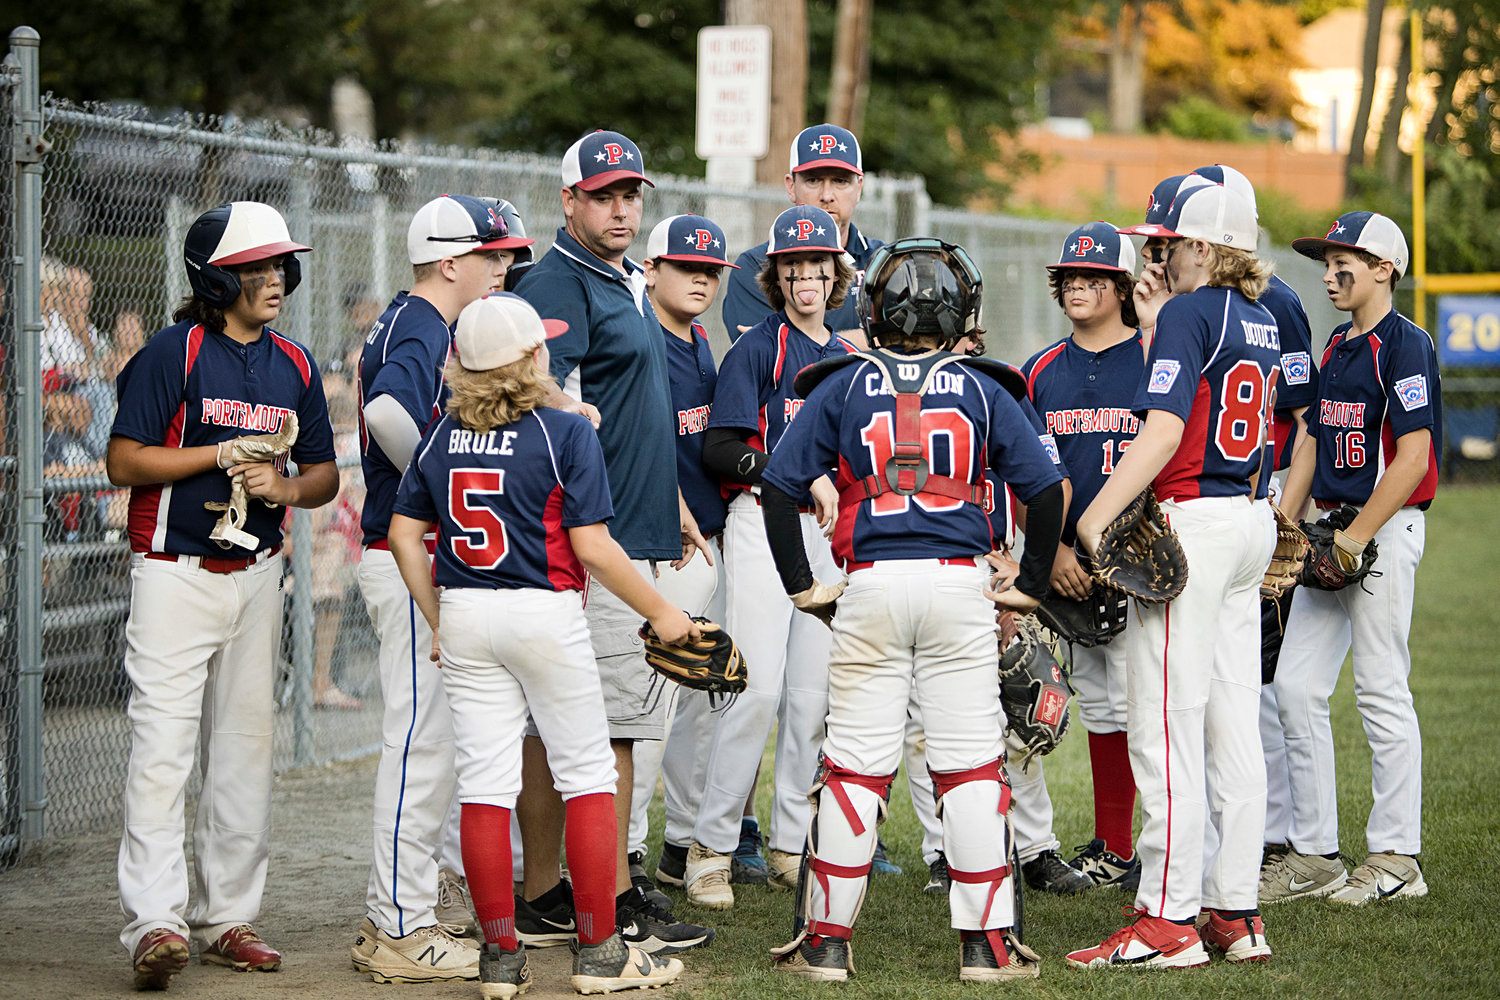 Portsmouth players talk between innings.